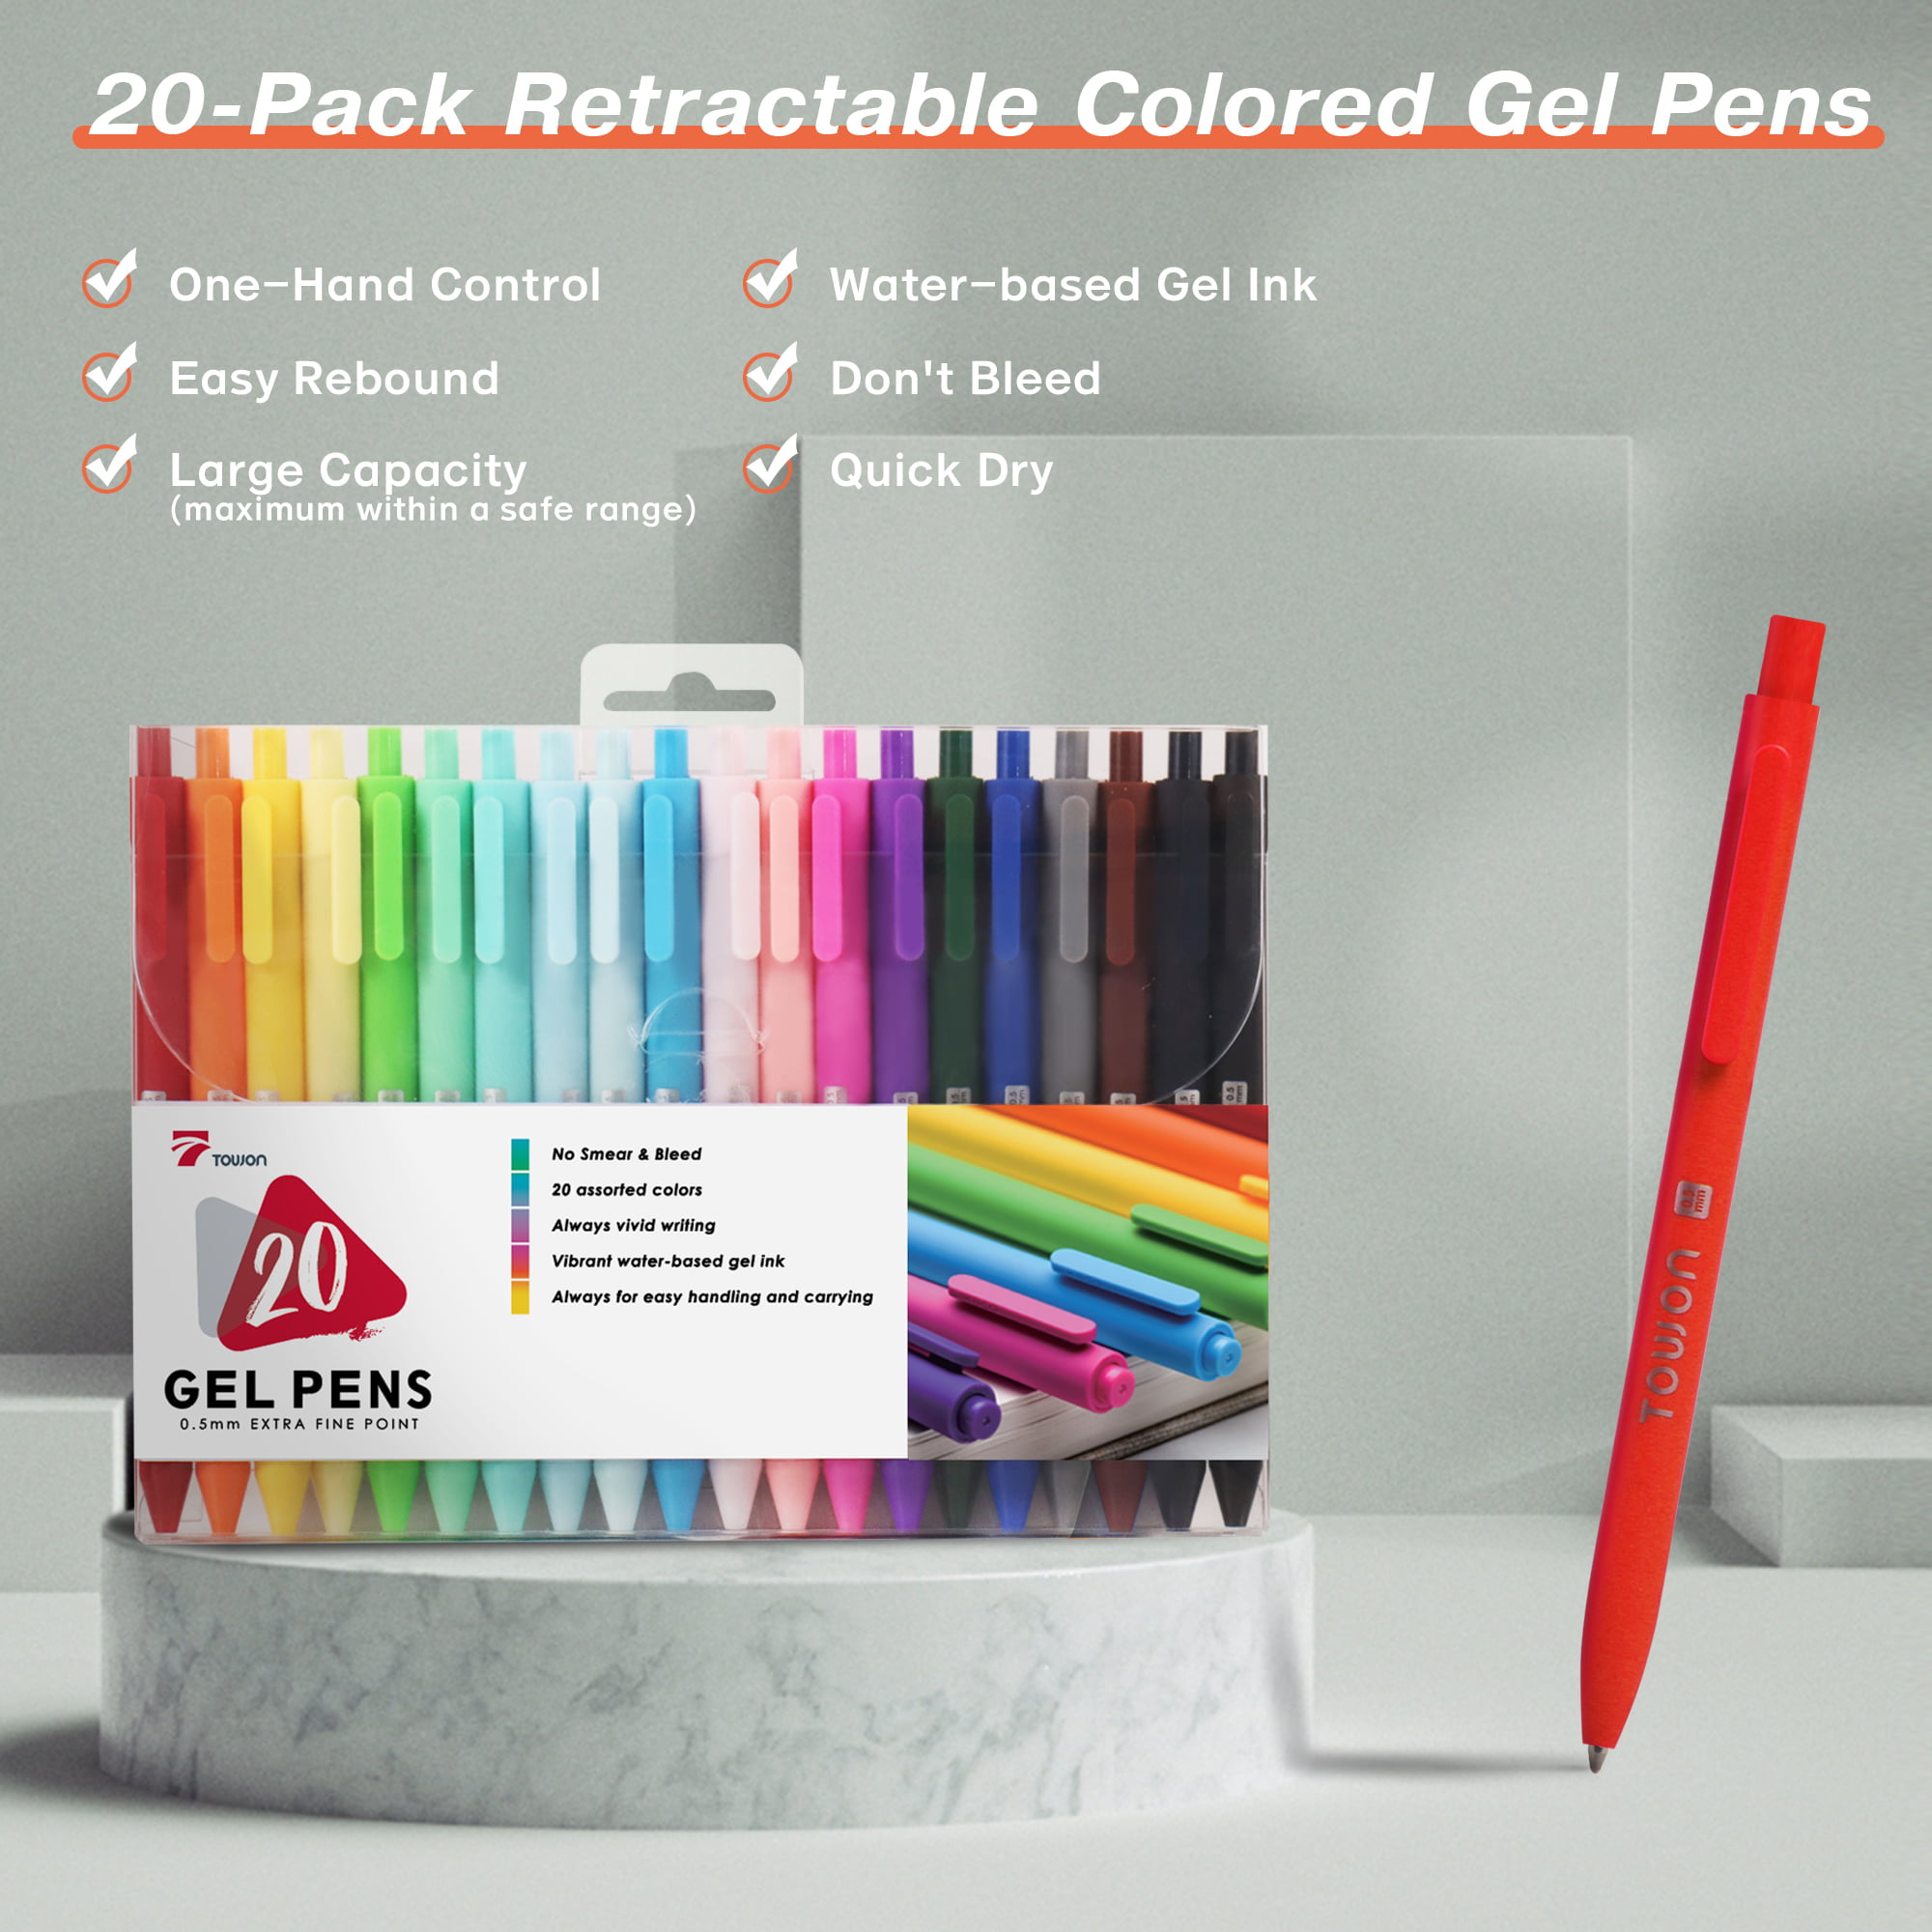 Colored gel pens for journaling 18PCS Retractable Colors Fnie Point Gel  Pens with Comfort Grip,Multicolor Pen Pack Smooth Writing for Journal  Notebook